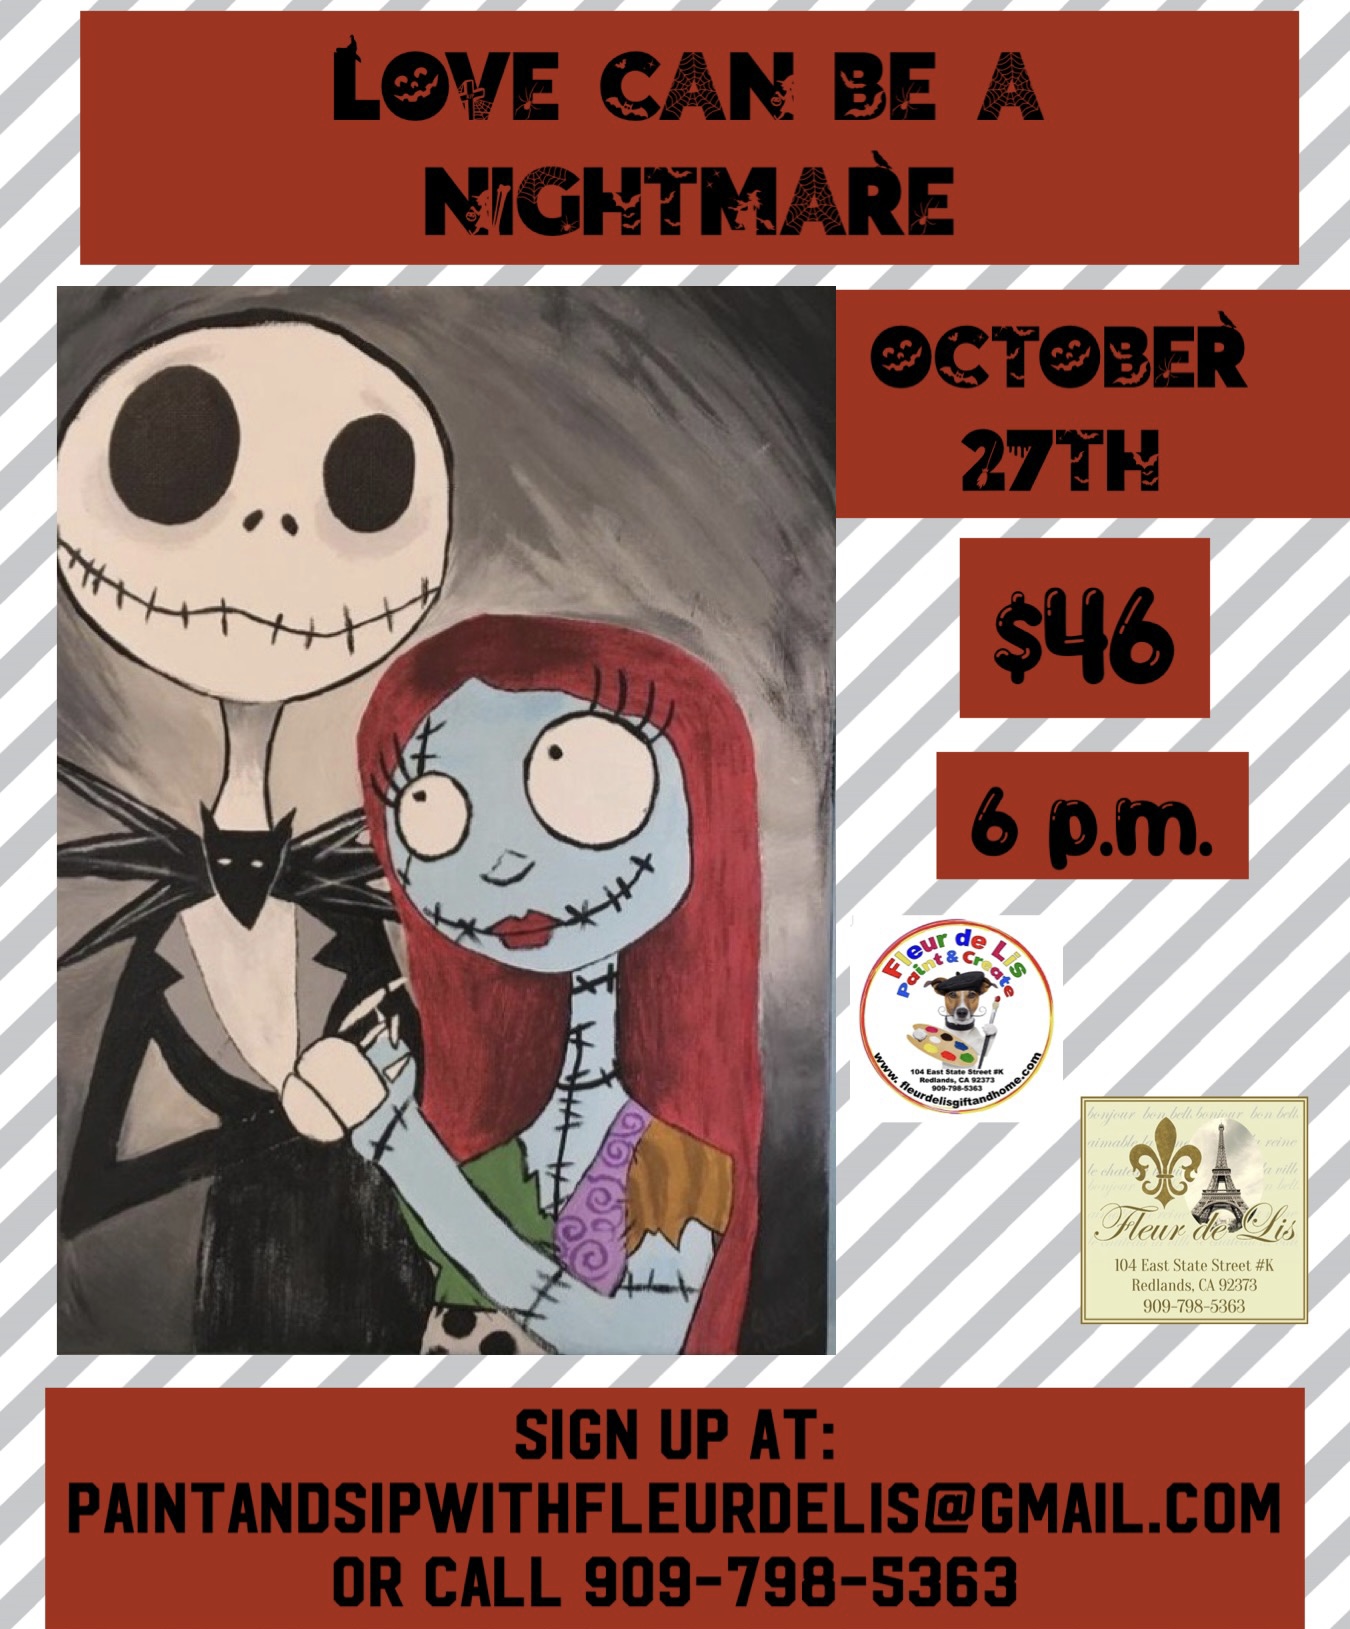 Love Can Be a Nightmare October 27th 6 p.m.